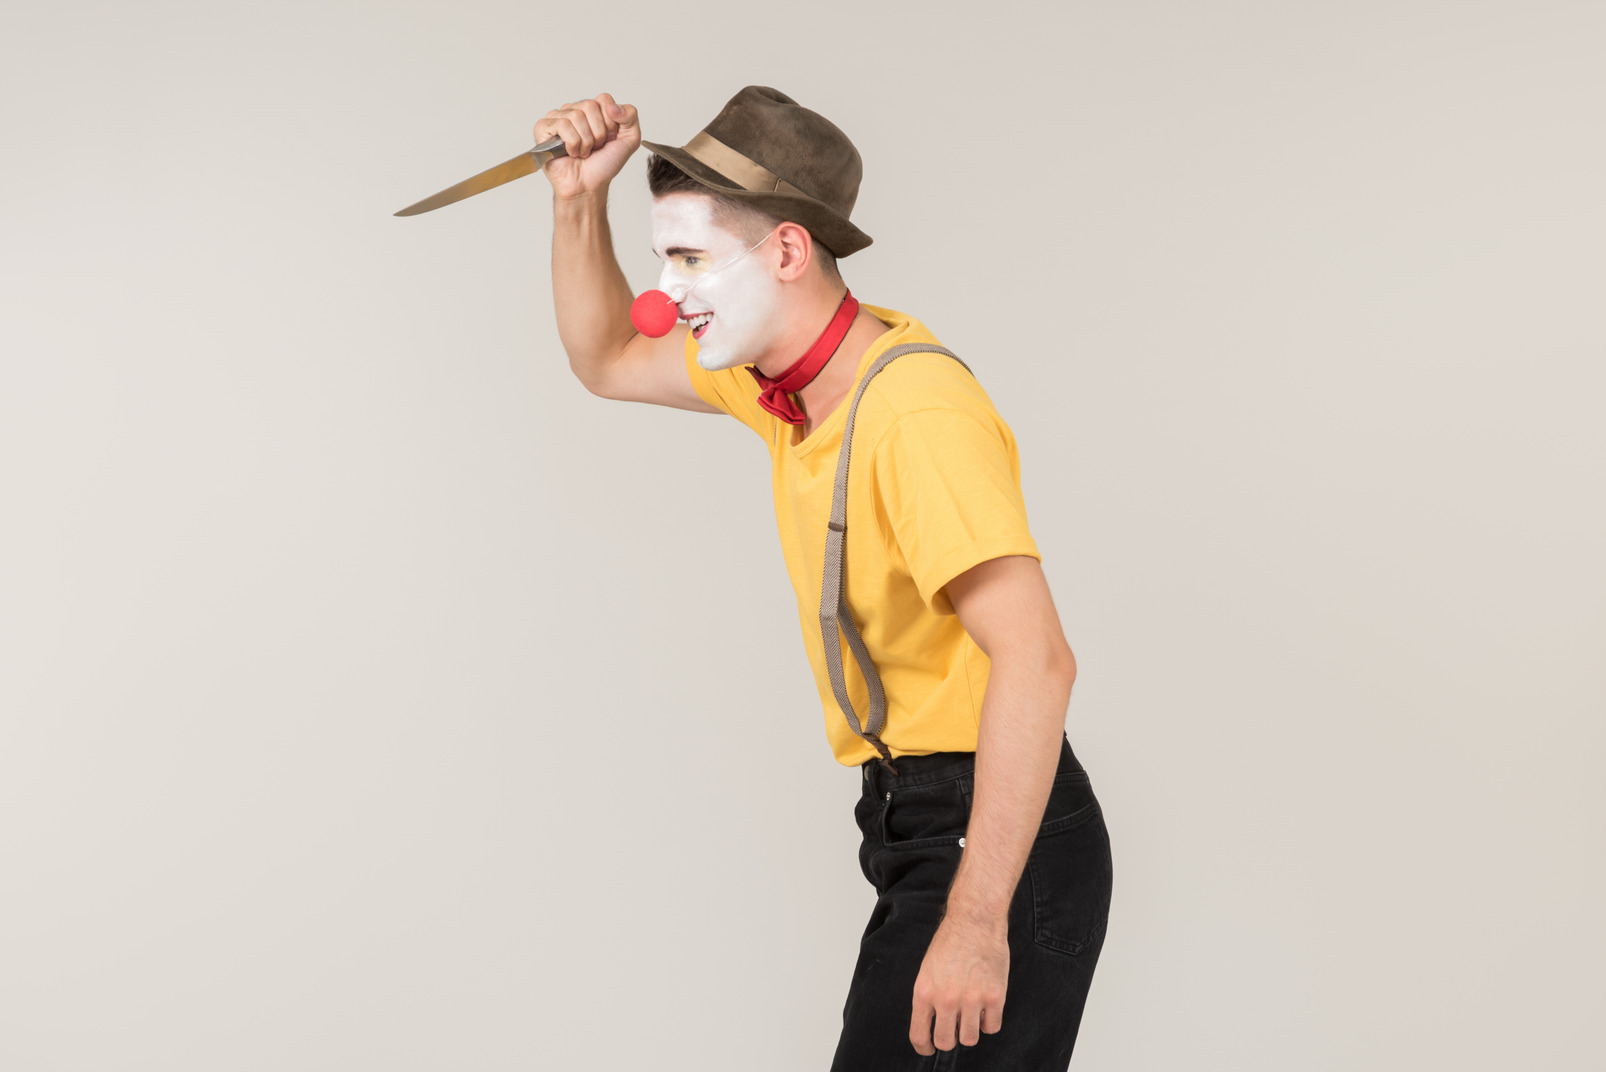 Male clown standing in profile and holding a knife